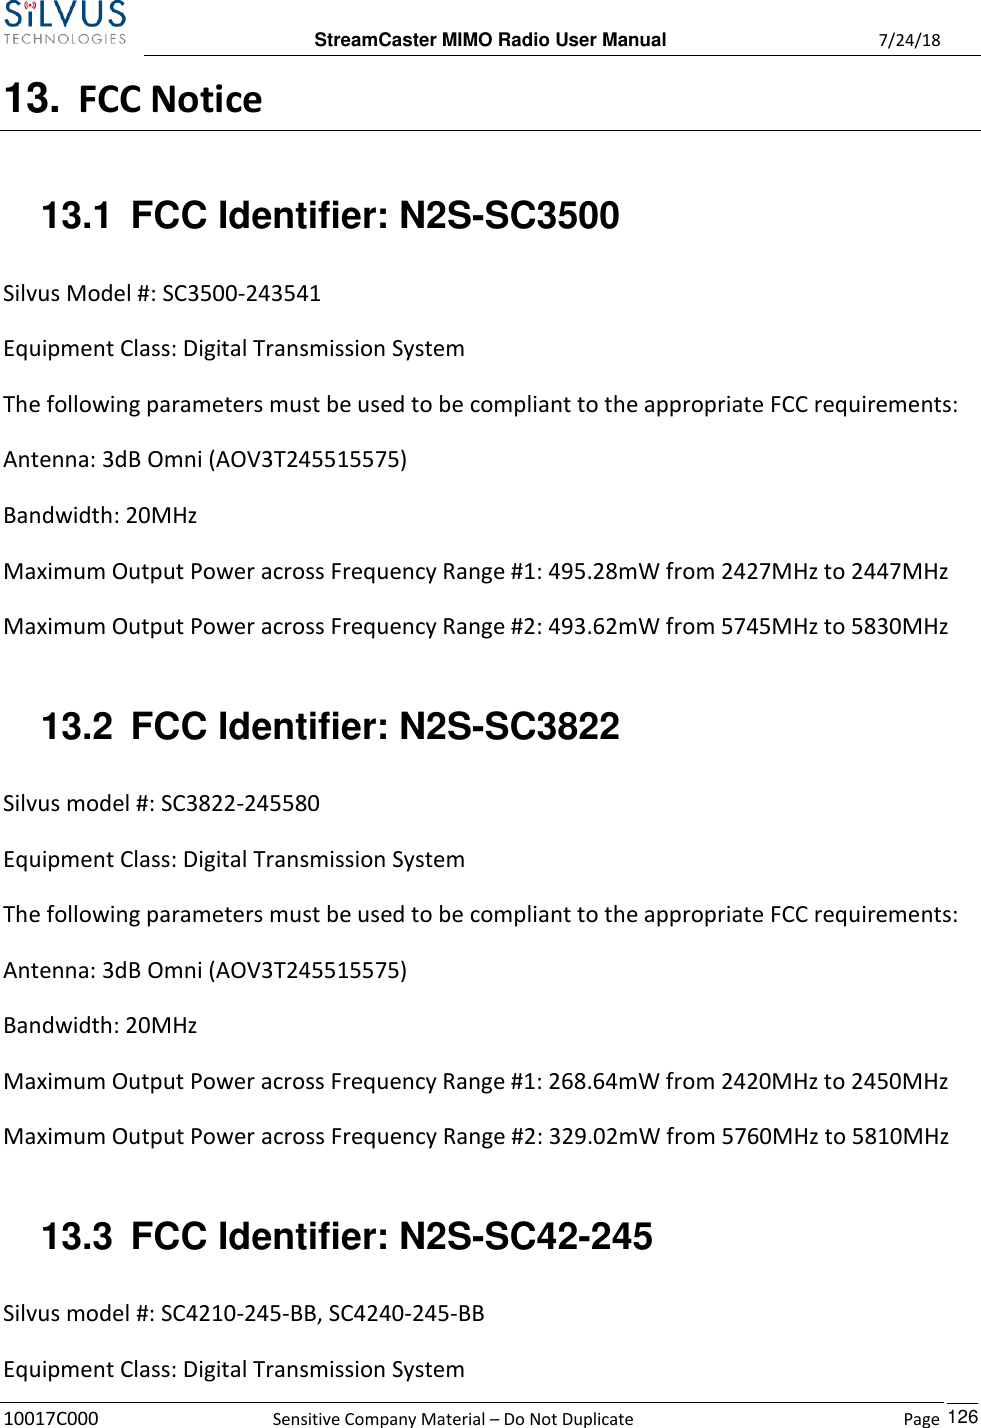  StreamCaster MIMO Radio User Manual  7/24/18 10017C000  Sensitive Company Material – Do Not Duplicate    Page    126 13. FCC Notice 13.1  FCC Identifier: N2S-SC3500 Silvus Model #: SC3500-243541 Equipment Class: Digital Transmission System The following parameters must be used to be compliant to the appropriate FCC requirements:  Antenna: 3dB Omni (AOV3T245515575) Bandwidth: 20MHz Maximum Output Power across Frequency Range #1: 495.28mW from 2427MHz to 2447MHz  Maximum Output Power across Frequency Range #2: 493.62mW from 5745MHz to 5830MHz  13.2  FCC Identifier: N2S-SC3822 Silvus model #: SC3822-245580 Equipment Class: Digital Transmission System The following parameters must be used to be compliant to the appropriate FCC requirements:  Antenna: 3dB Omni (AOV3T245515575) Bandwidth: 20MHz Maximum Output Power across Frequency Range #1: 268.64mW from 2420MHz to 2450MHz  Maximum Output Power across Frequency Range #2: 329.02mW from 5760MHz to 5810MHz  13.3  FCC Identifier: N2S-SC42-245 Silvus model #: SC4210-245-BB, SC4240-245-BB Equipment Class: Digital Transmission System 